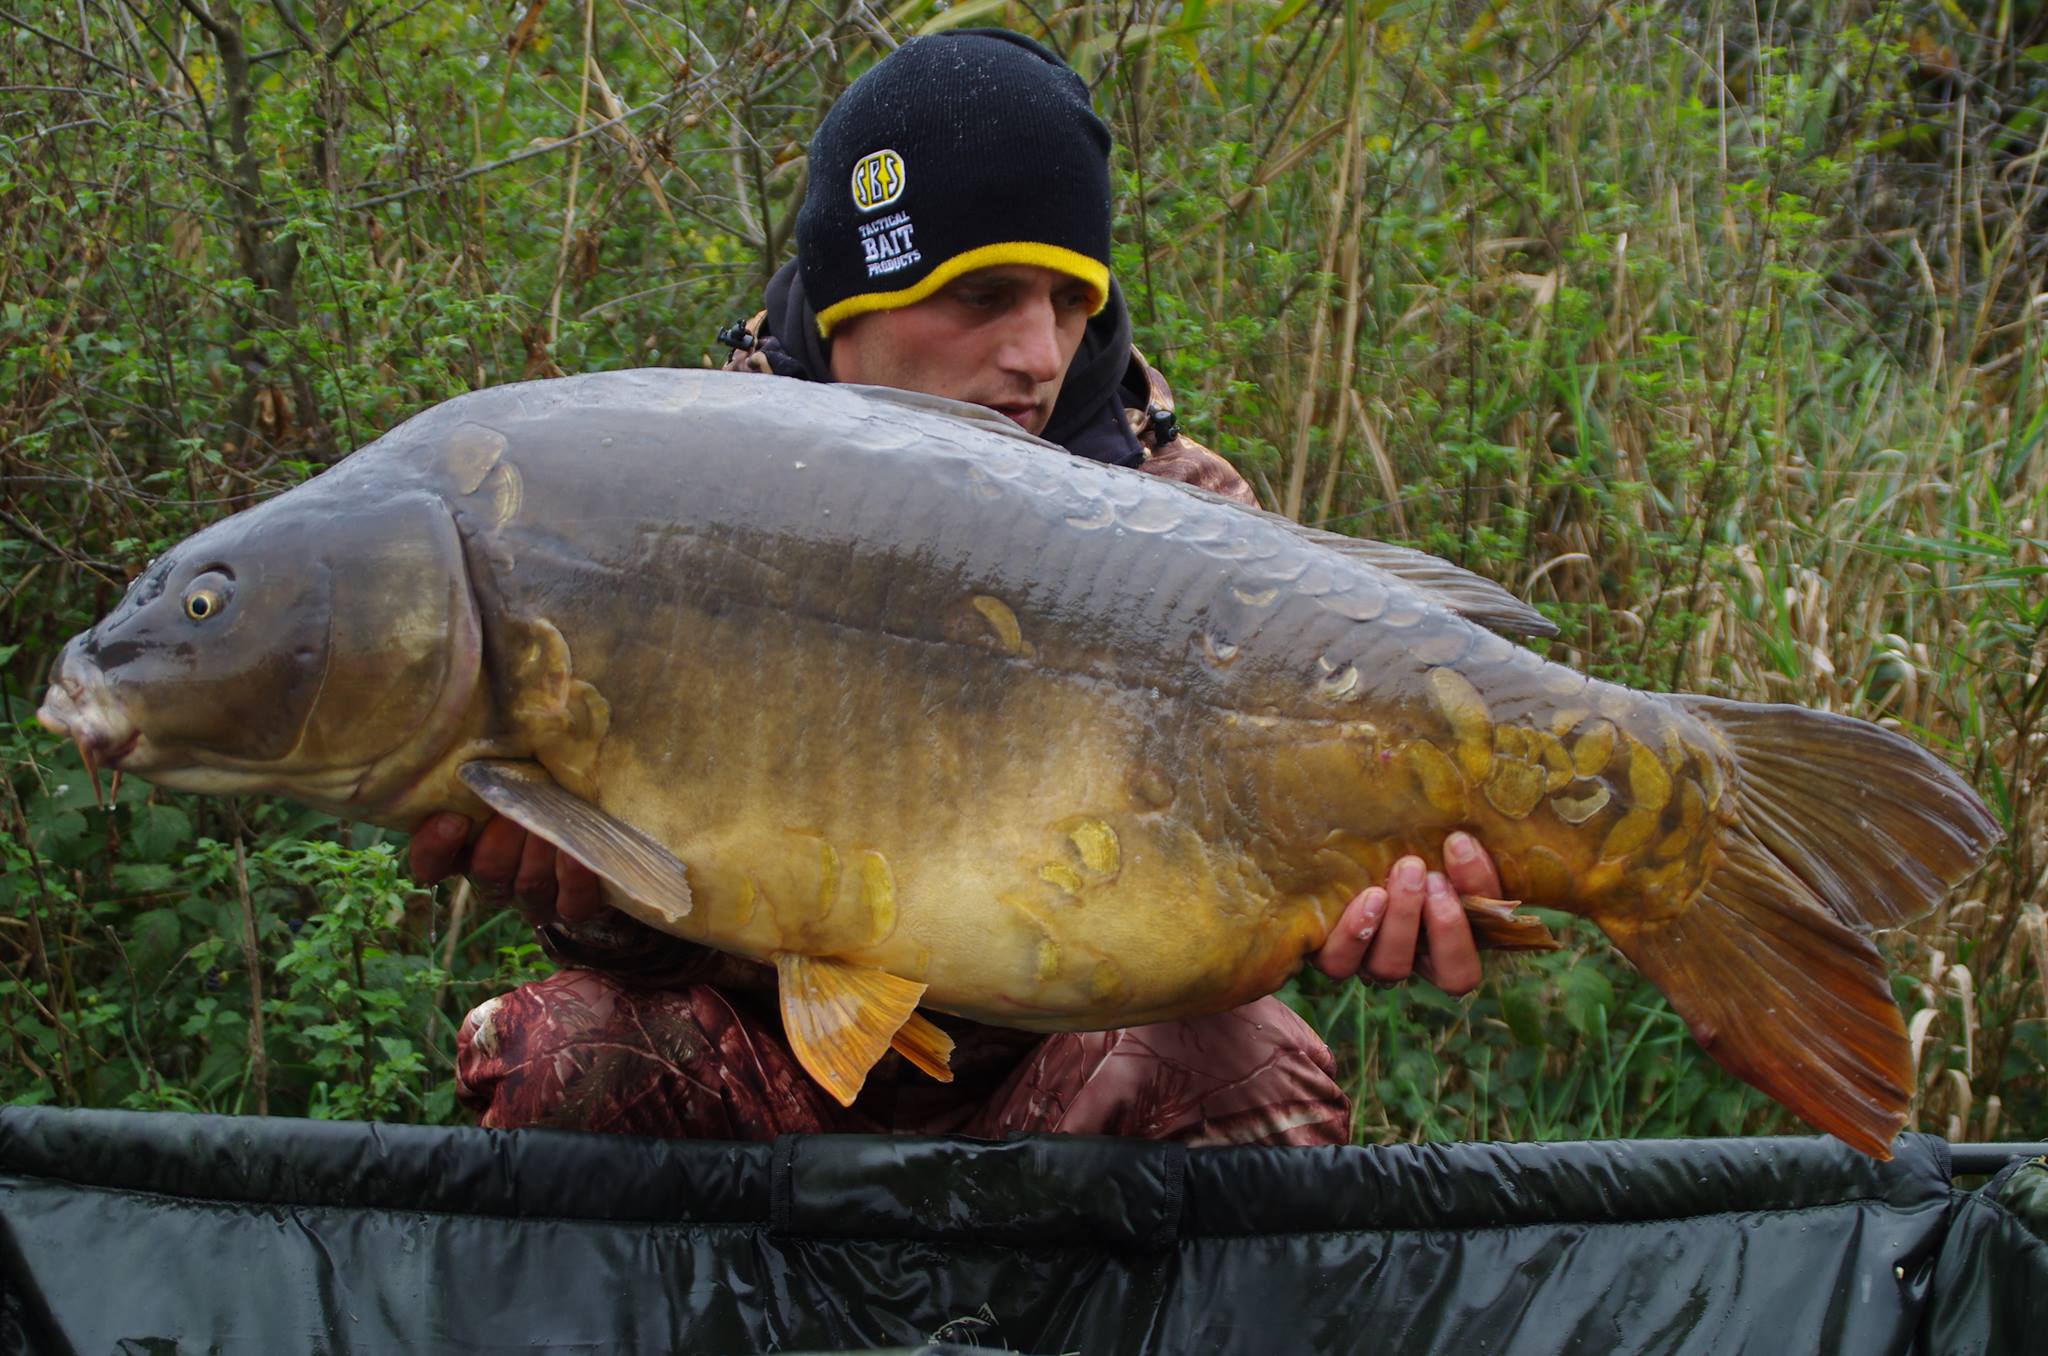 I caught this stunning 19,5 kg carp with this bait combination